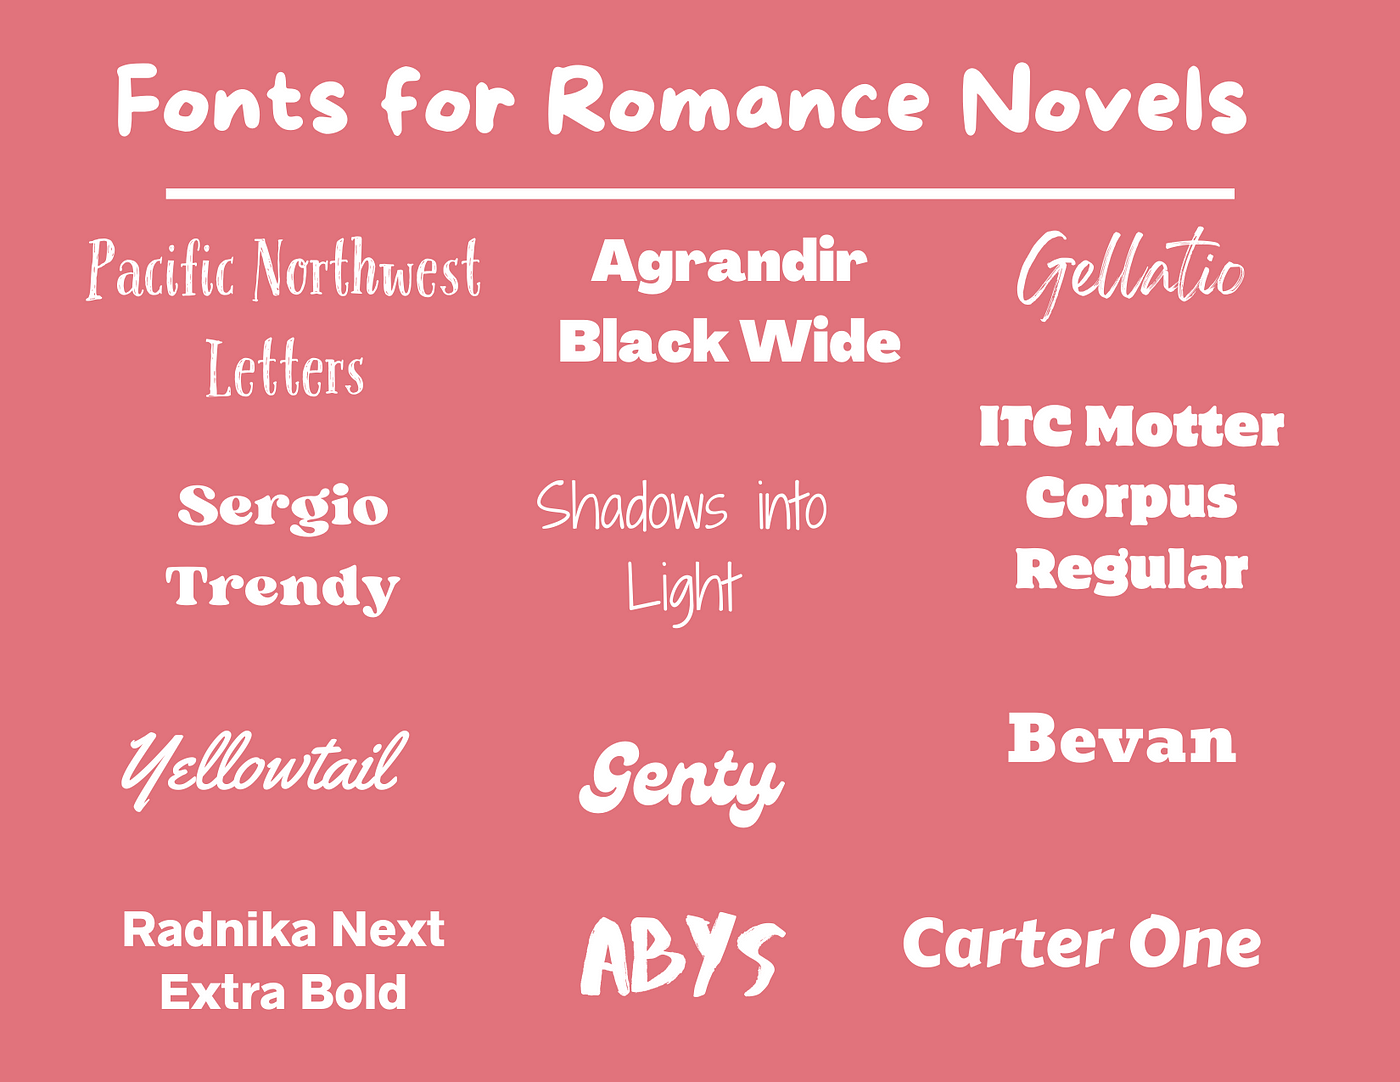 20 Fonts You Can Use for Book Covers on Canva | by Author Shanea Patterson  | Medium